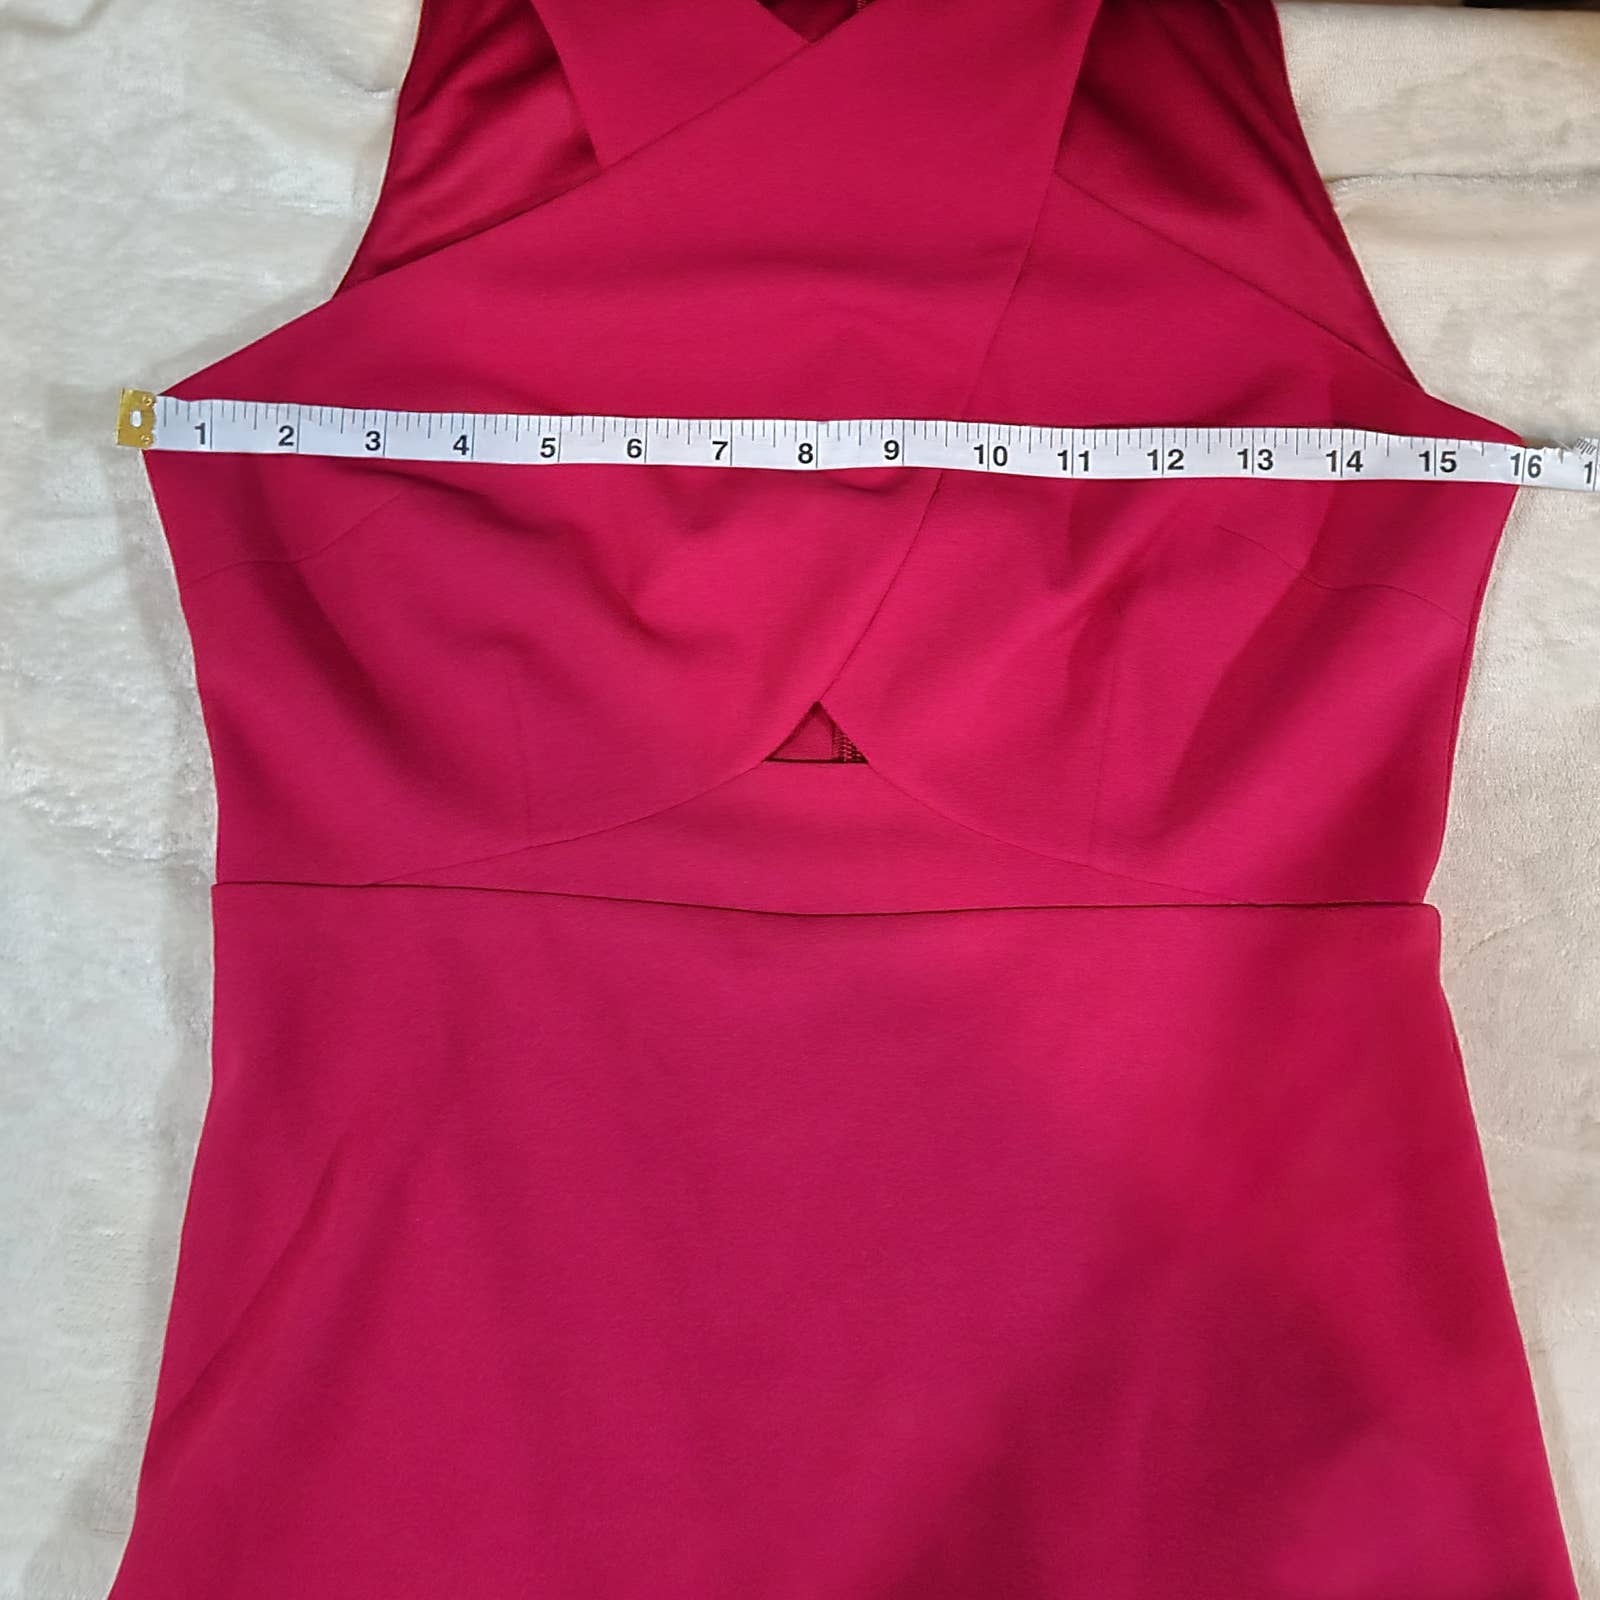 Guess Pinkish Red Fitted Dress with High Keyhole Neckline - Size 6Markita's ClosetGUESS